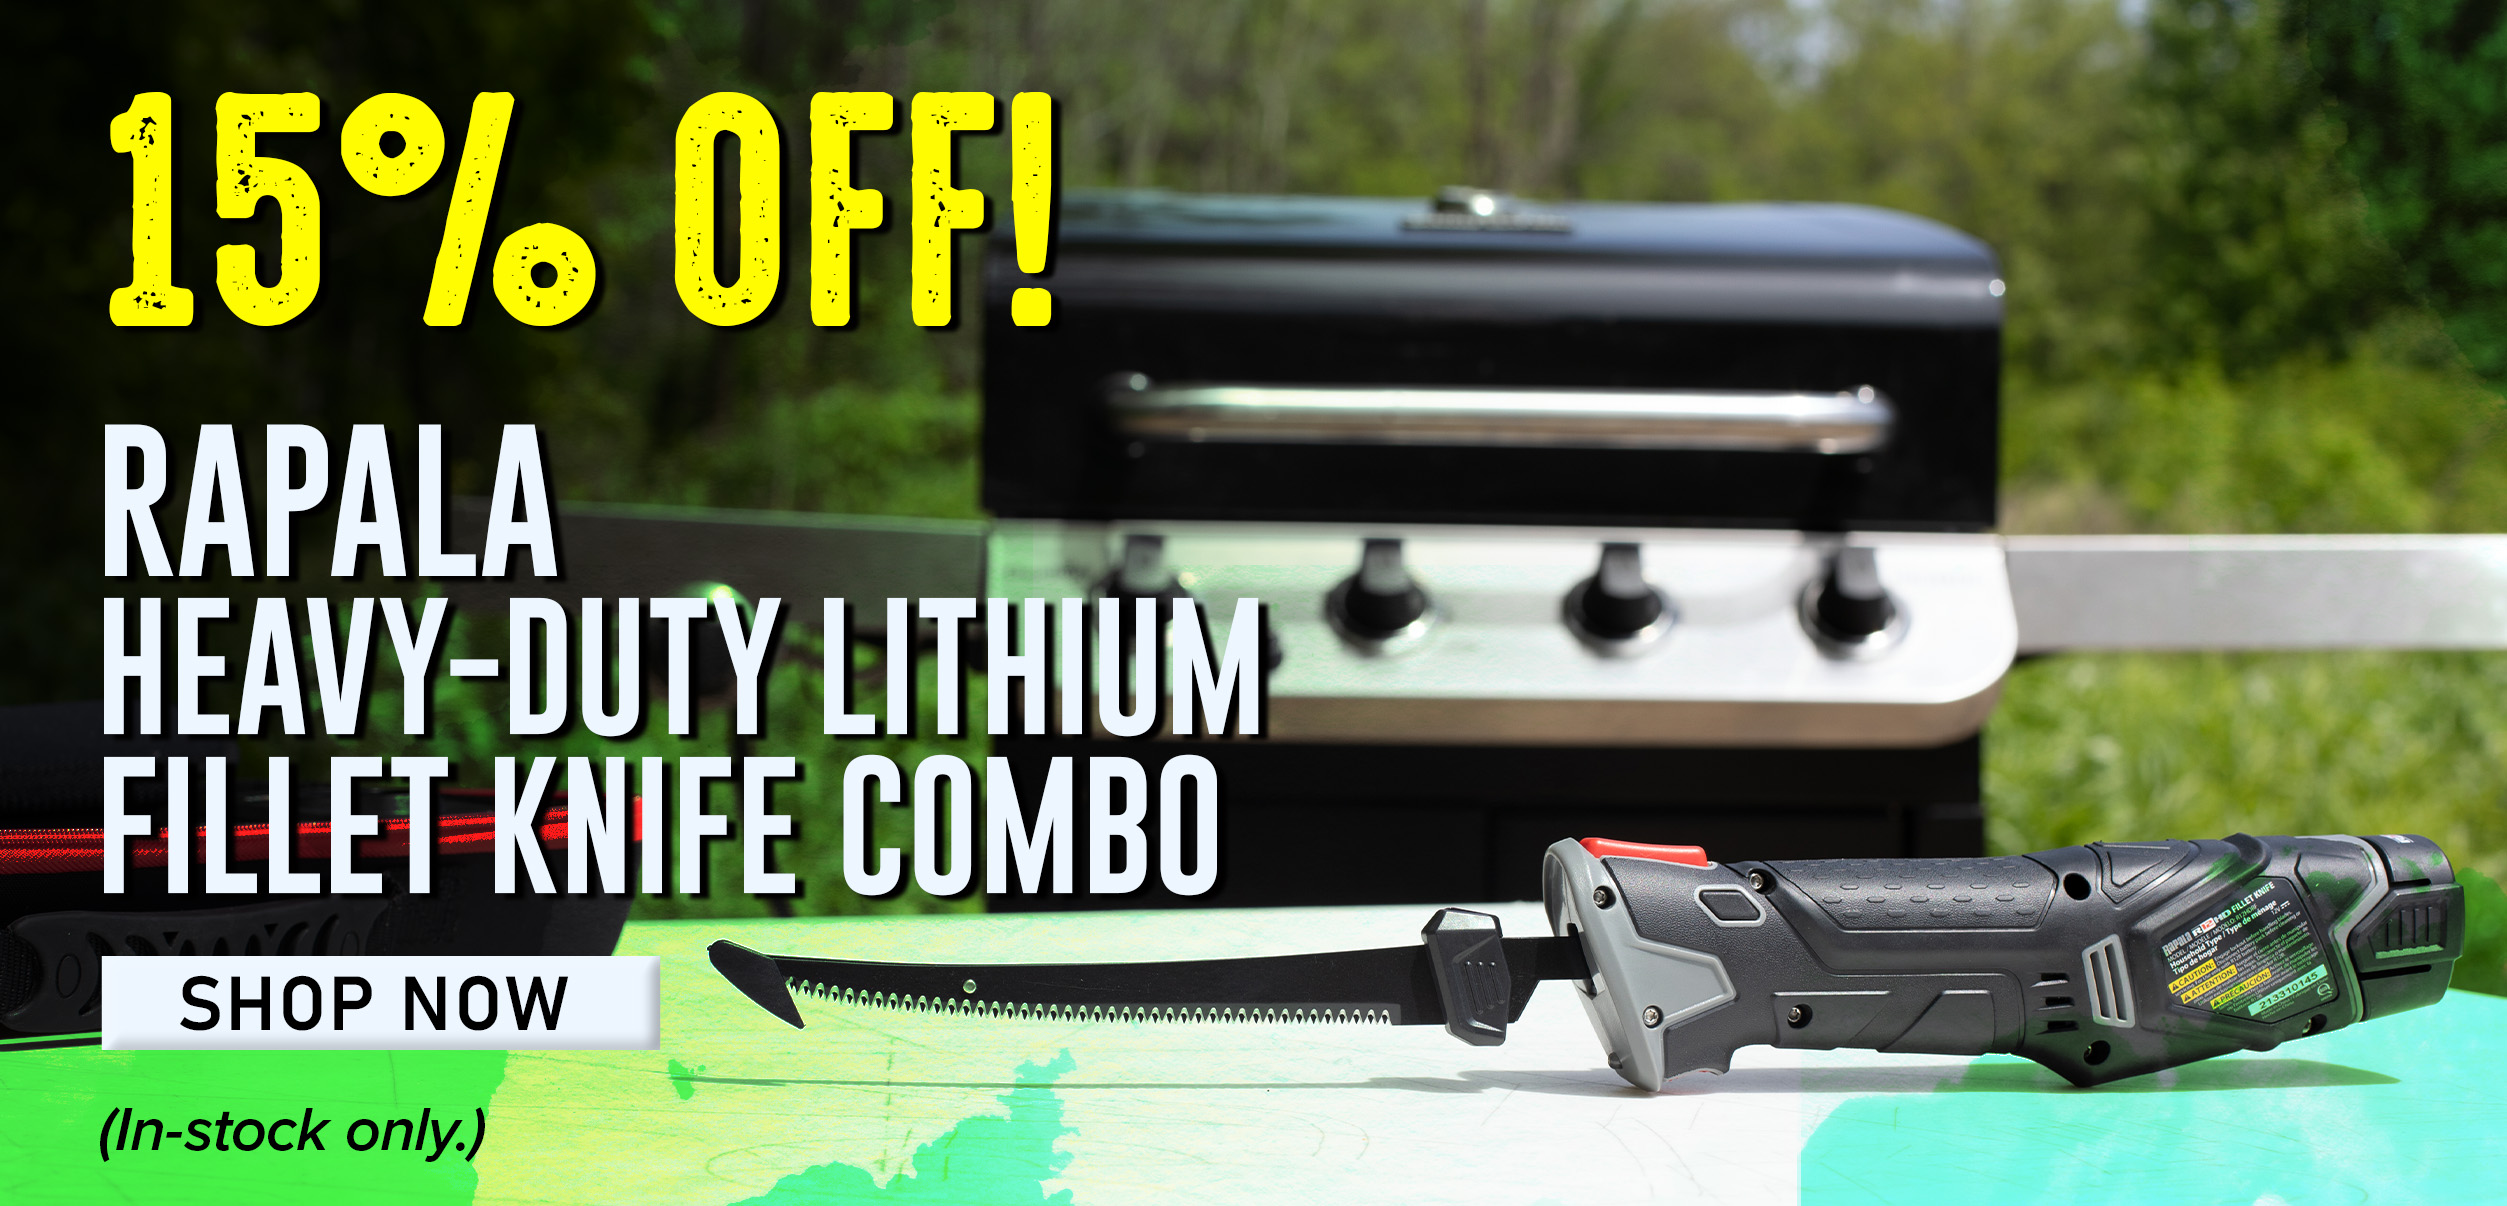 15% Off! Rapala Heavy-Duty Lithium Fillet Knife Combo Shop Now (In-stock only.)